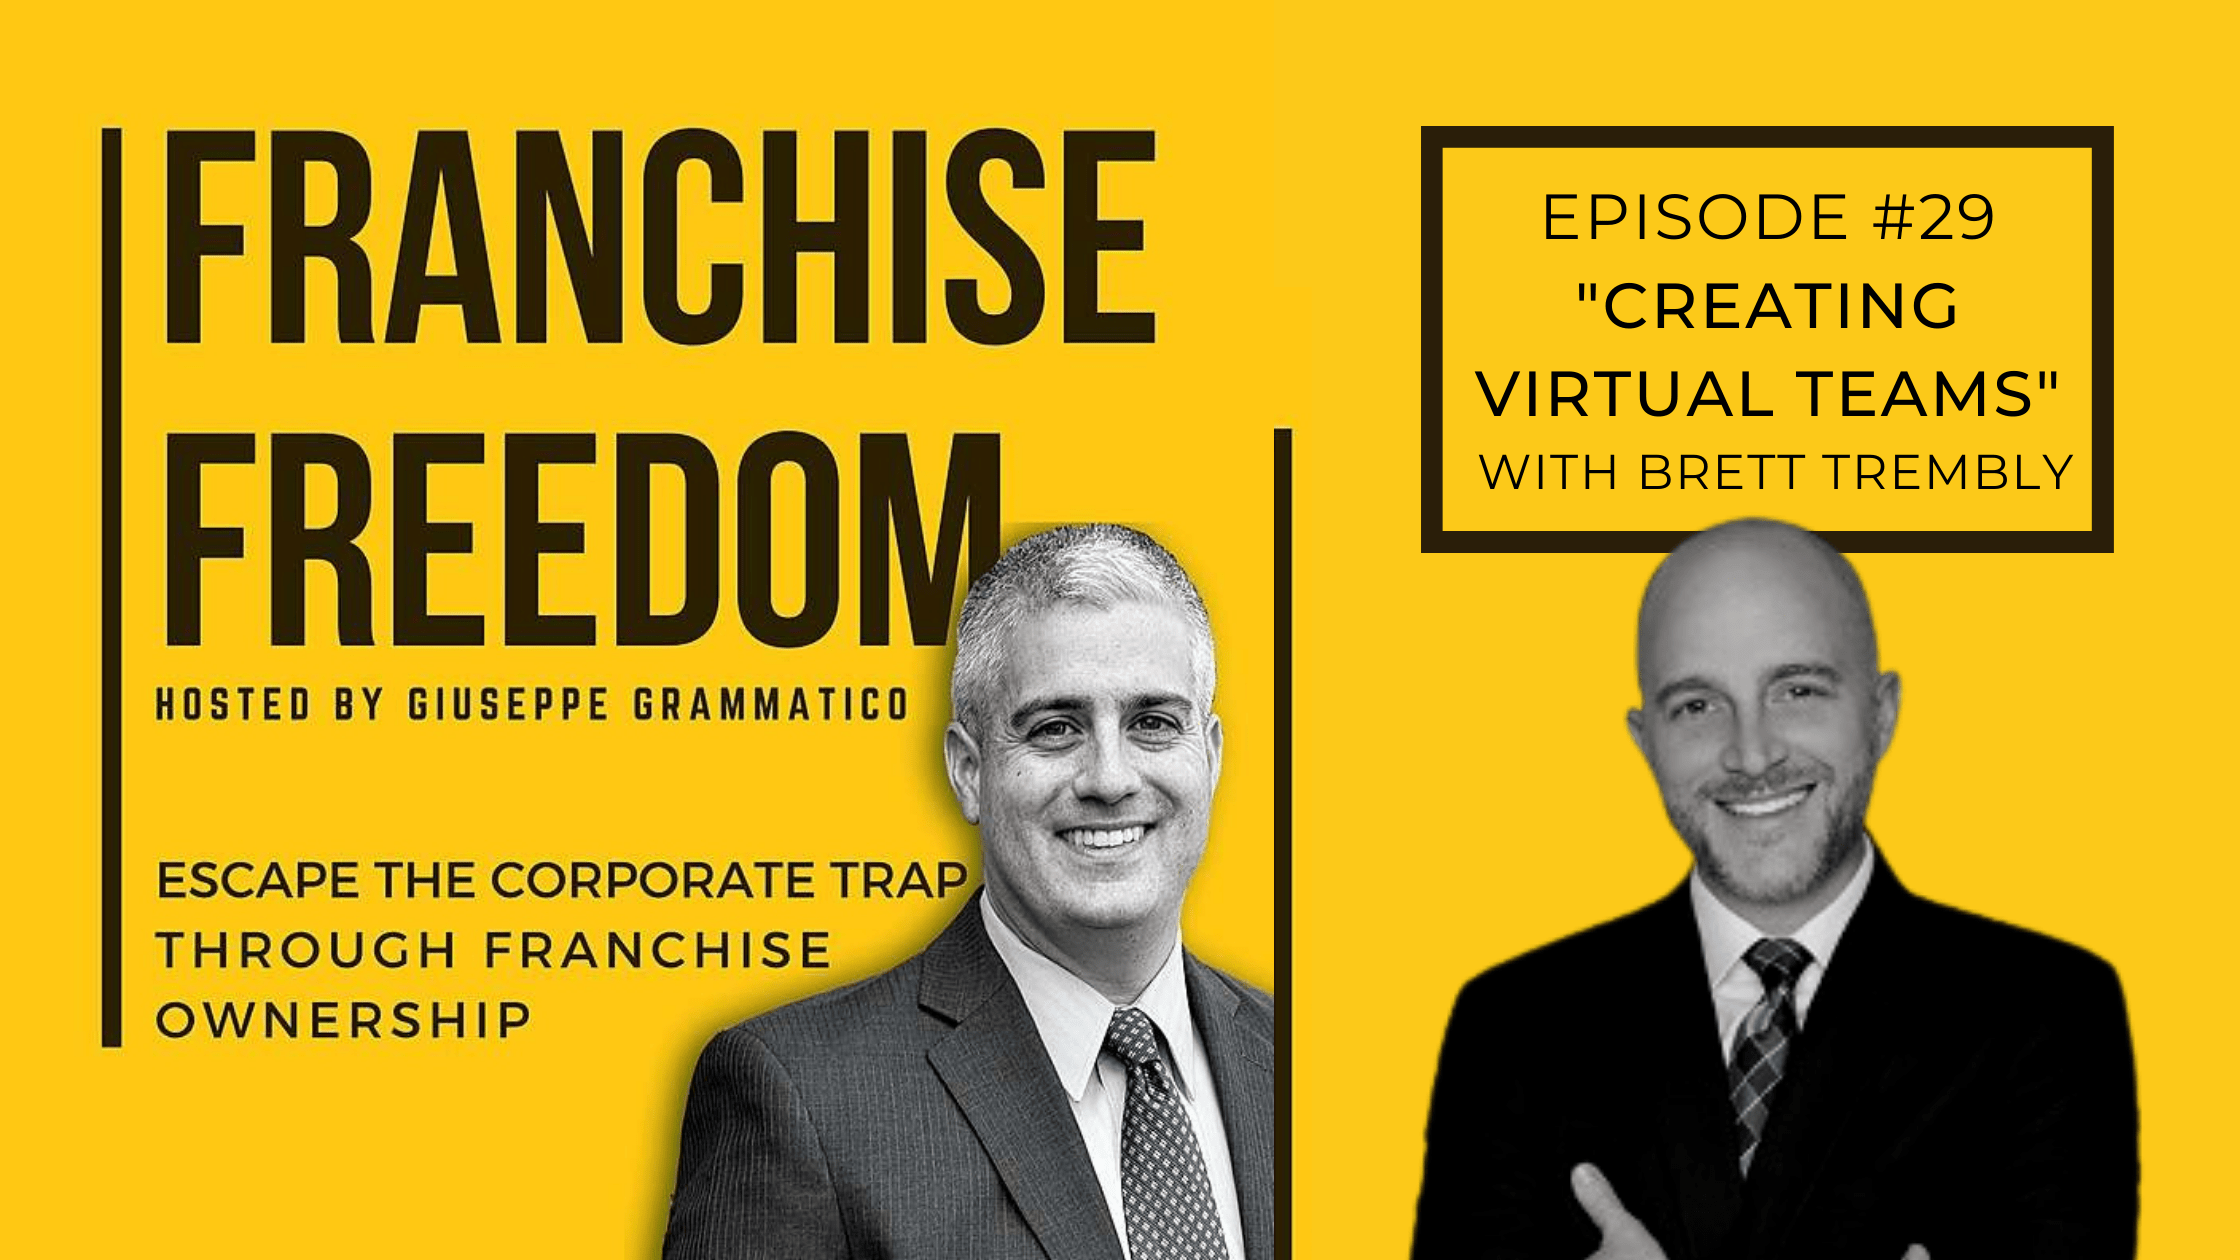 The Franchise Freedom Podcast